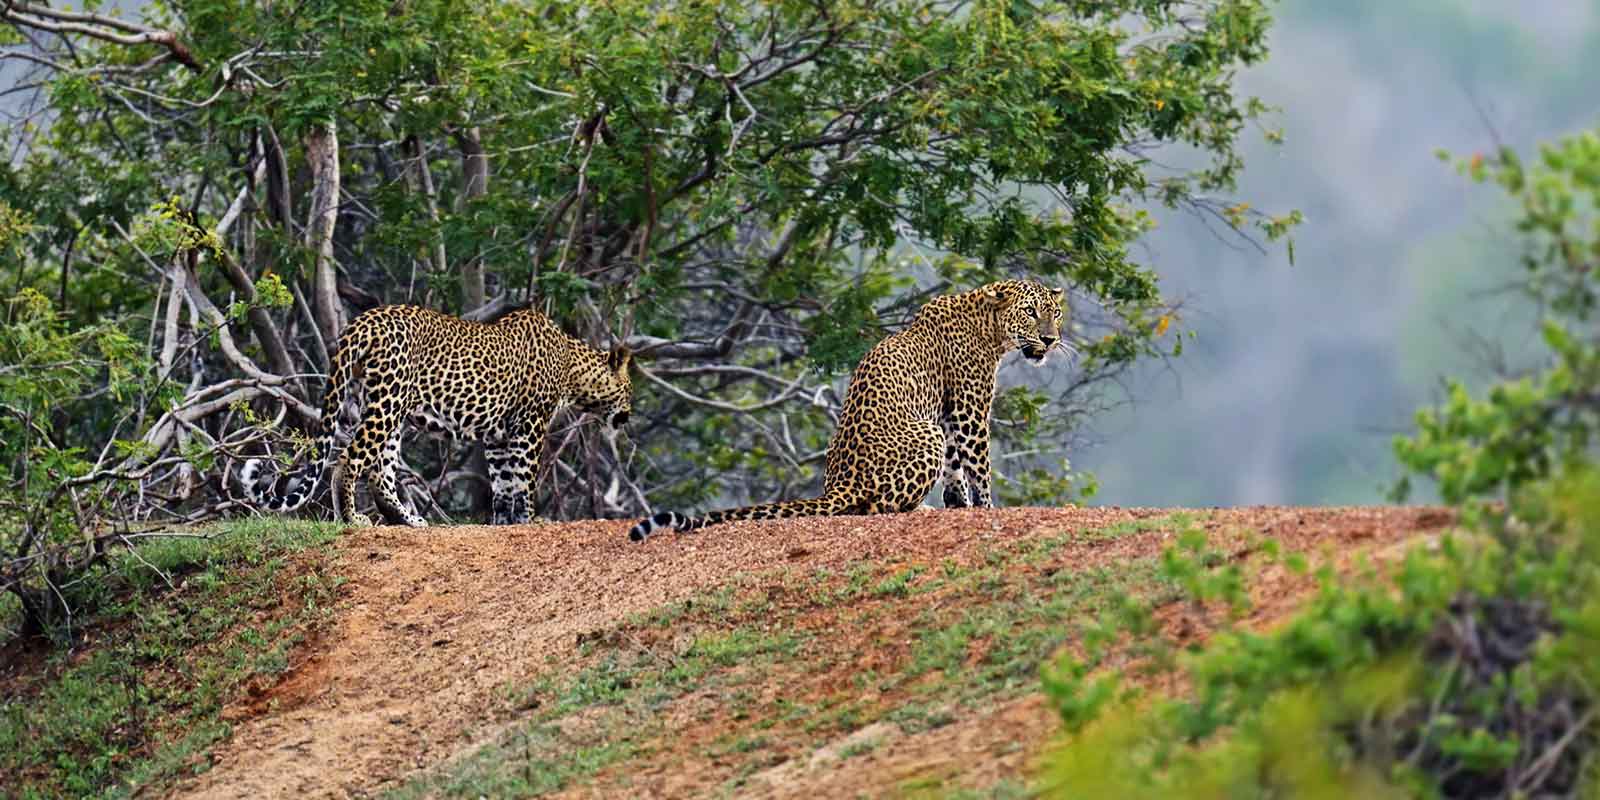 Pair of leopards snarling at each other in Yala